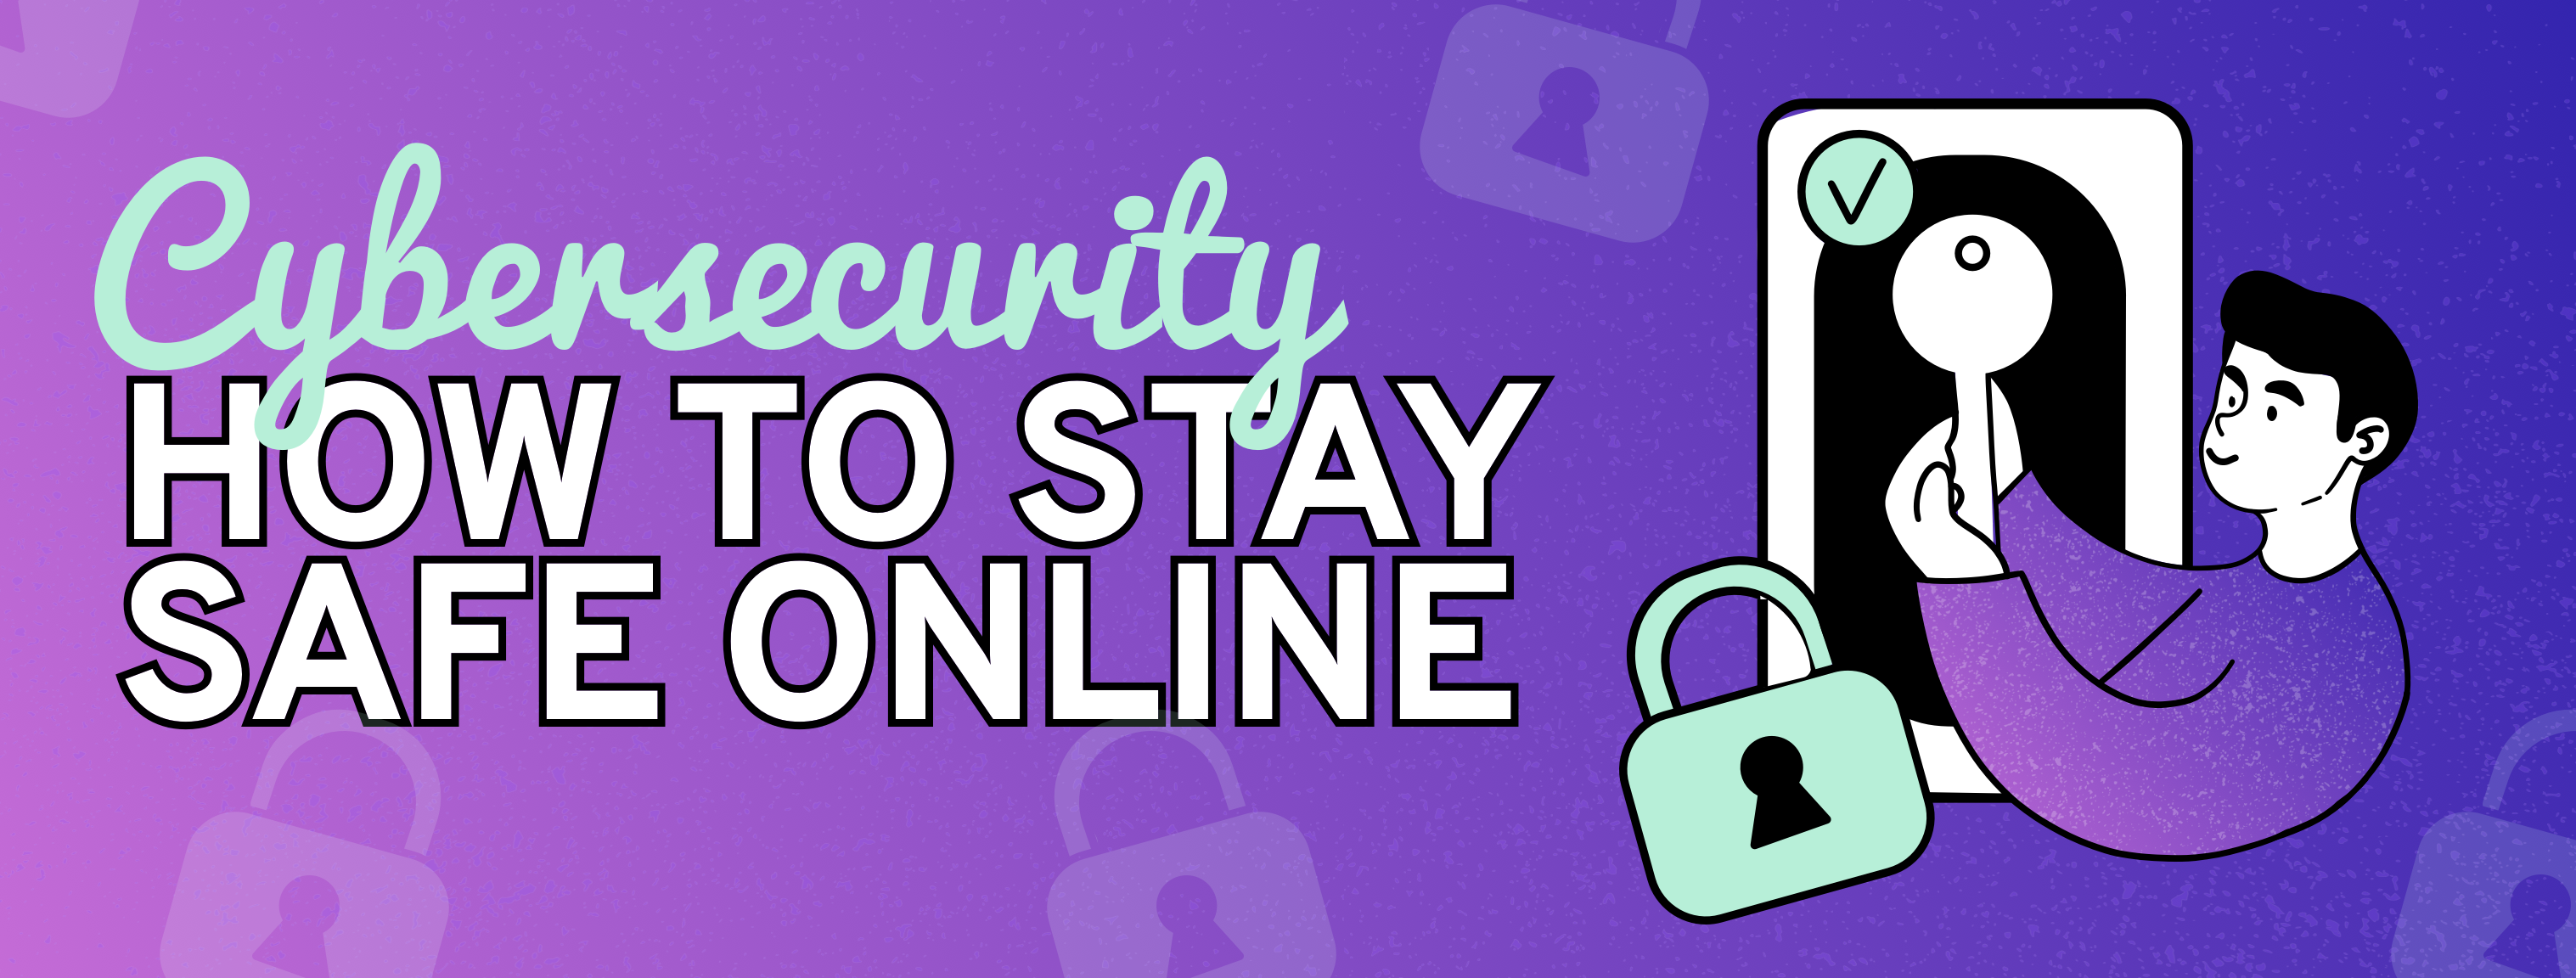 cybersecurity stay safe online